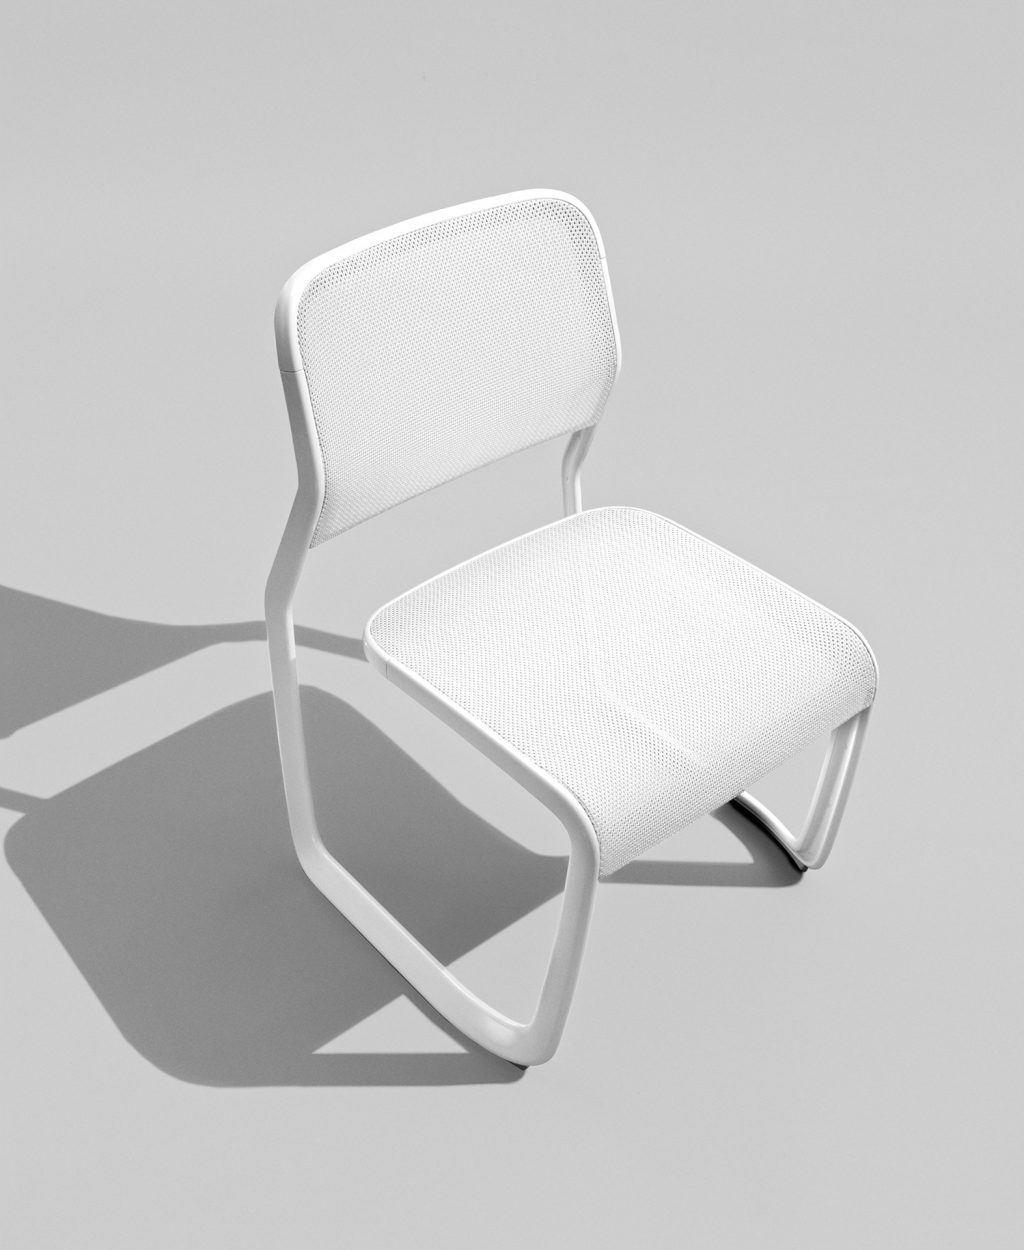 Marc Newson's New Chair for Knoll Is an Ode to Design Legacy and a